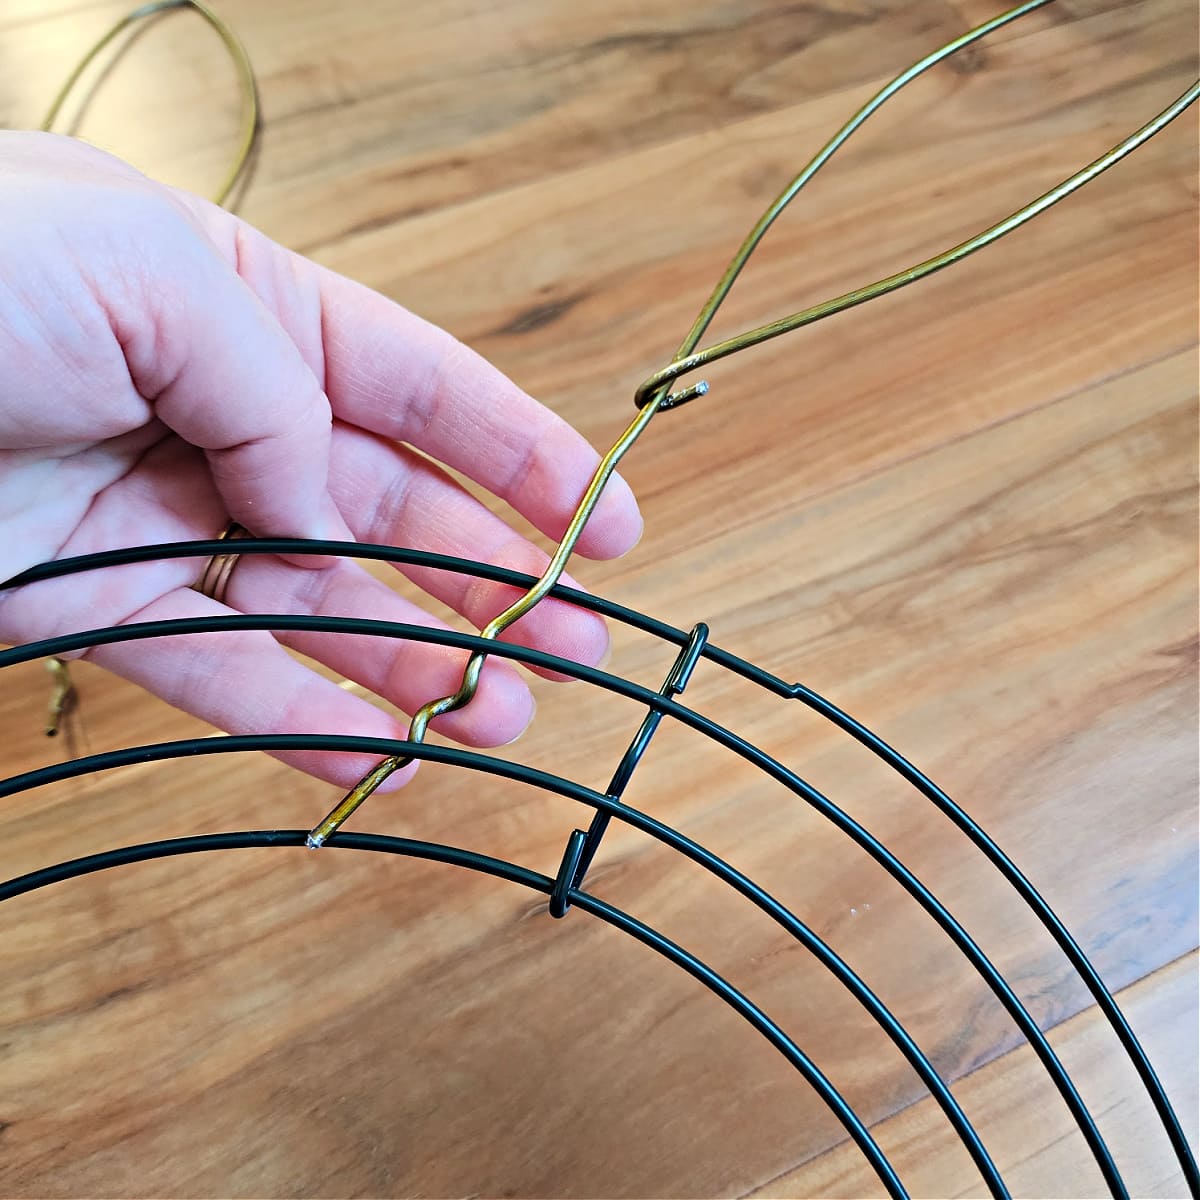 Coat hanger bunny ear being inserted through round wire wreath frame.